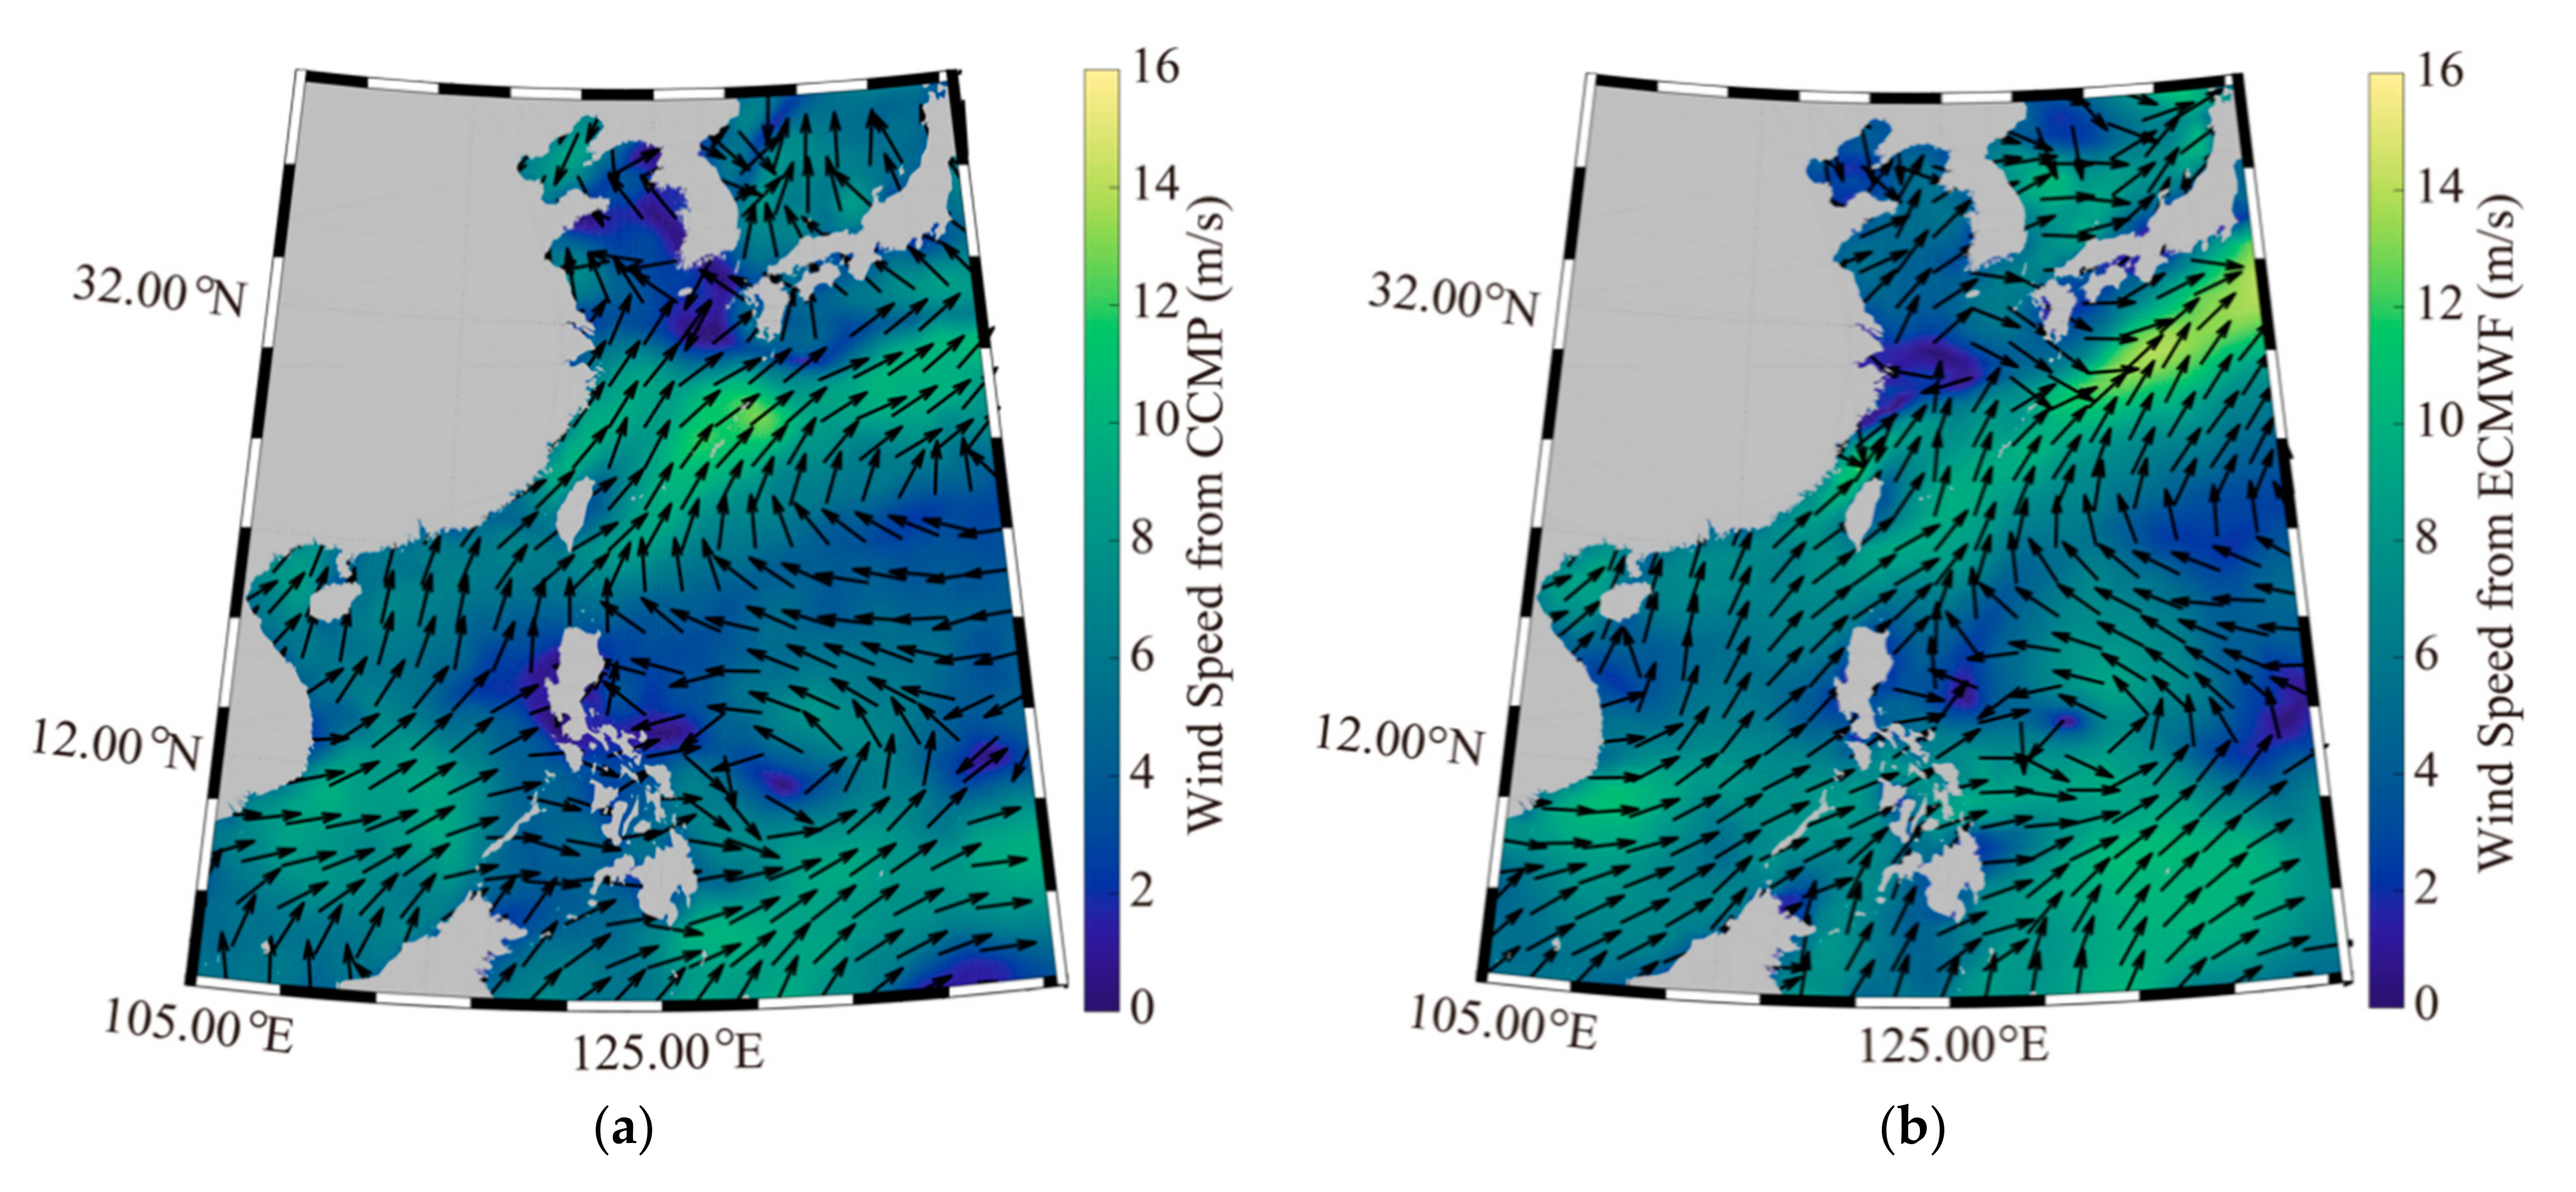 Stokes | of Free Effects in on Analysis Transport Pacific Full-Text the JMSE Sea Wave-Induced Surface | Temperature Simulations Western Ocean